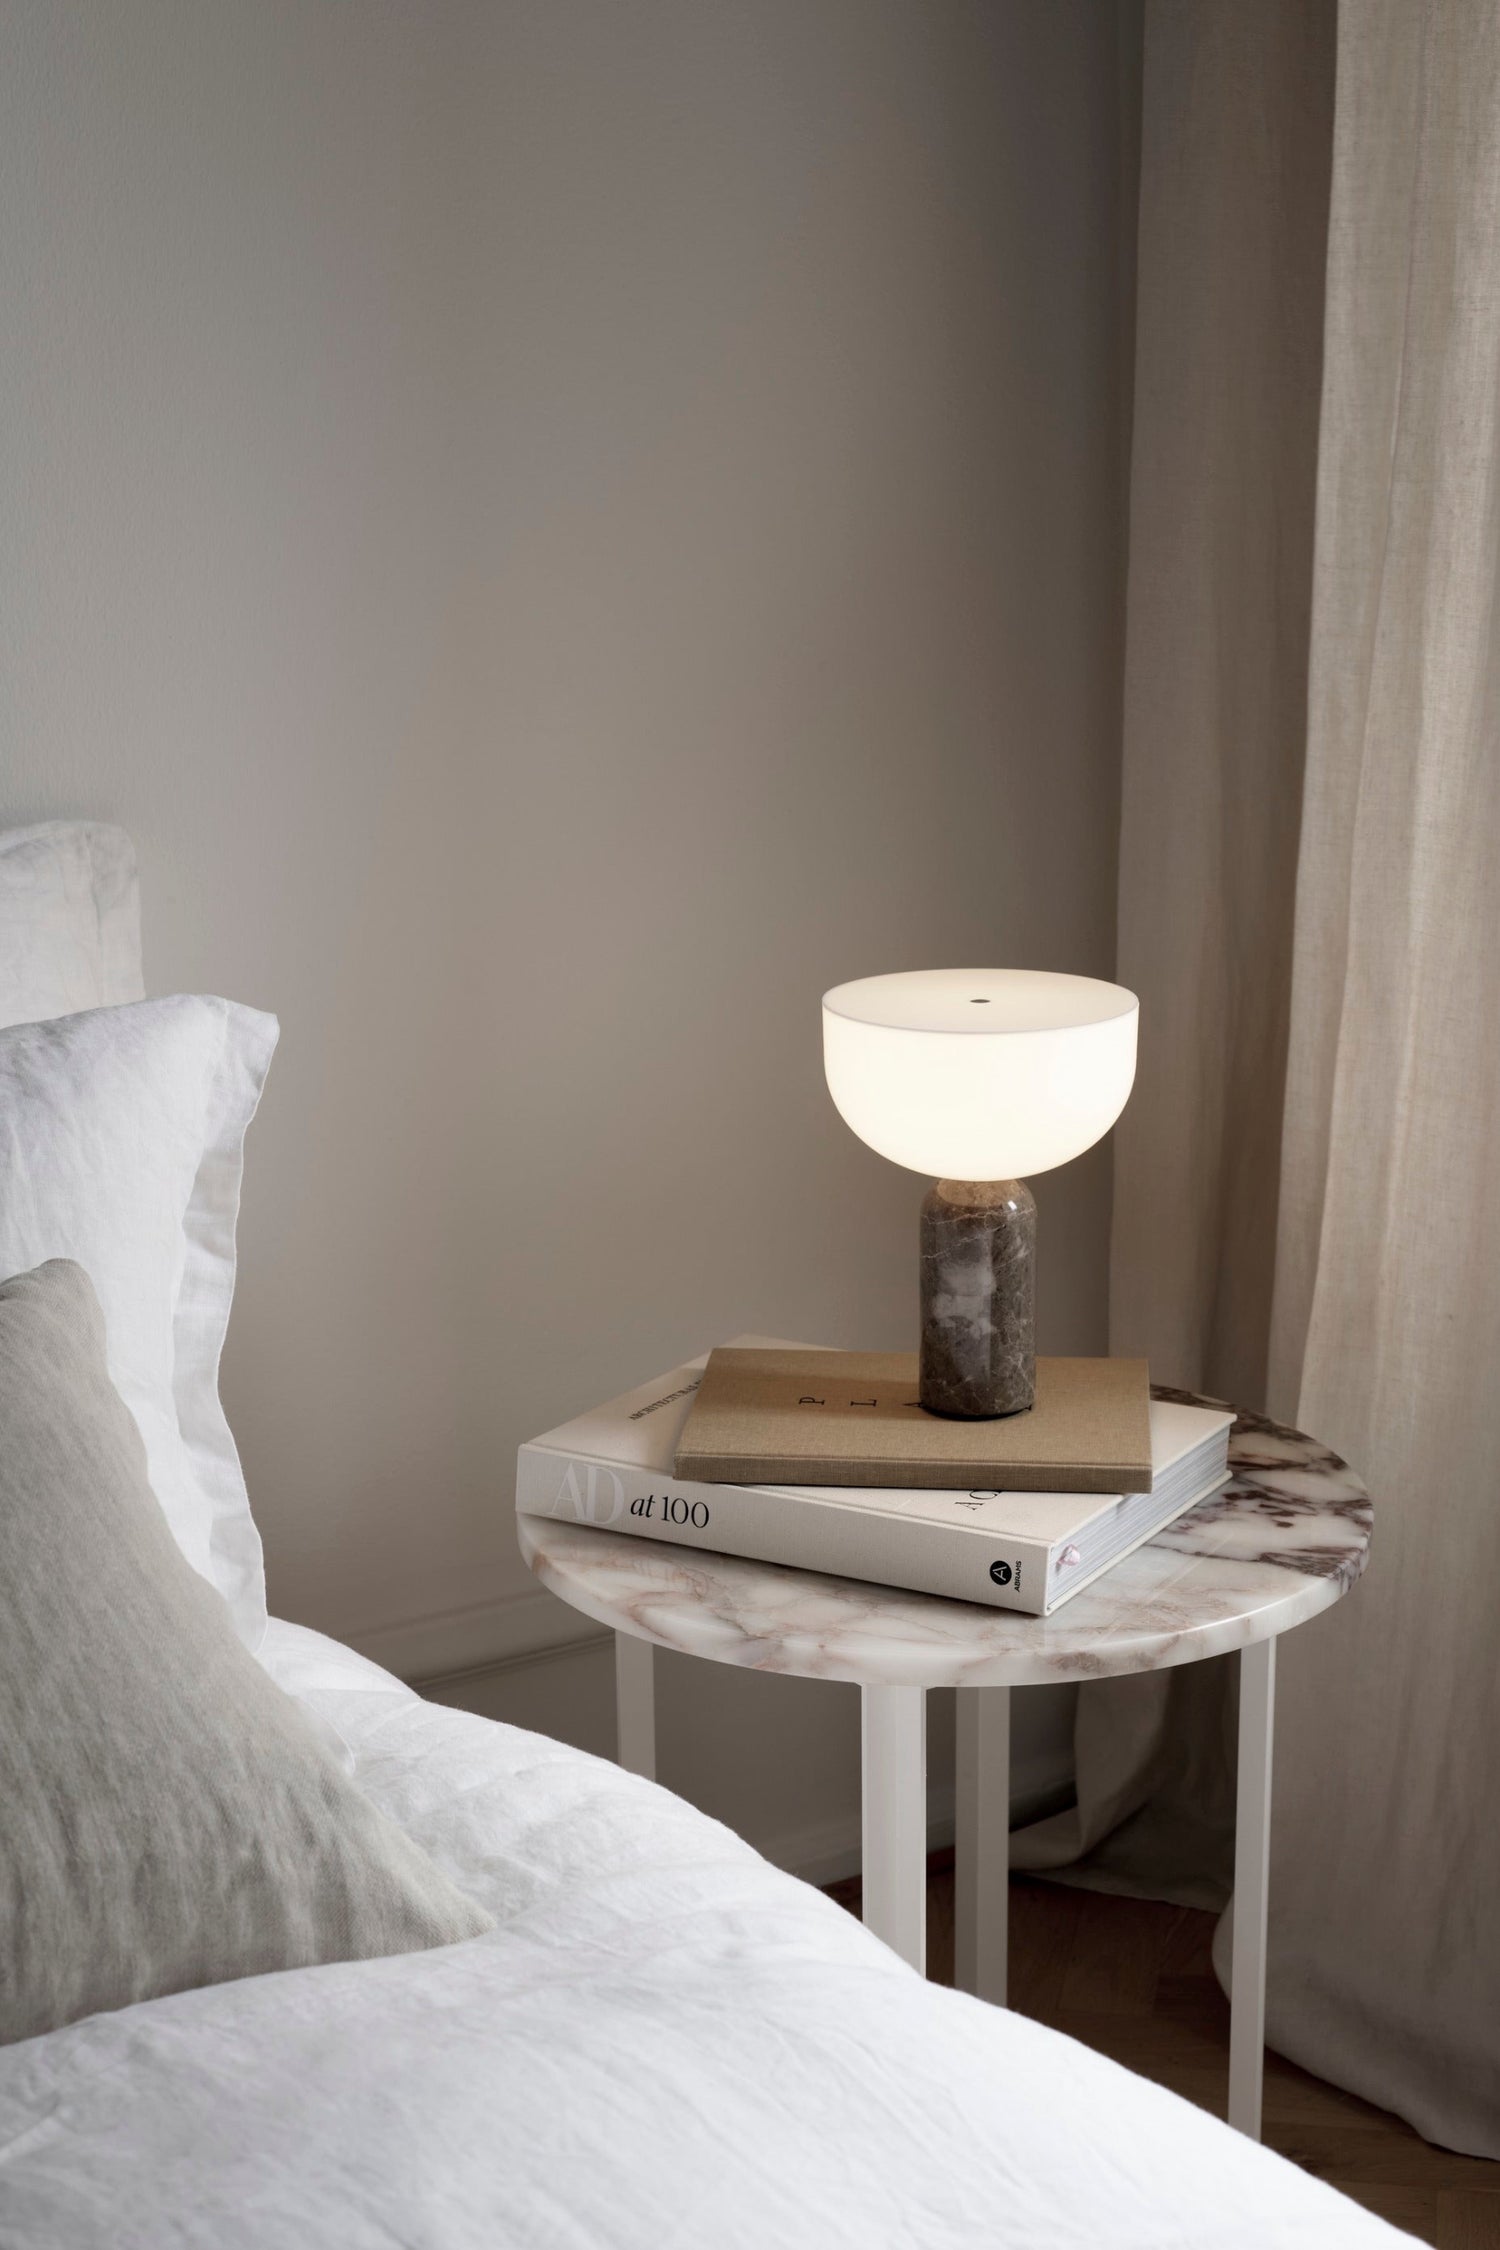 Kizu Portable Lamp Gris du Marais by New Works. Set on books on side table in neutral bedroom interior.